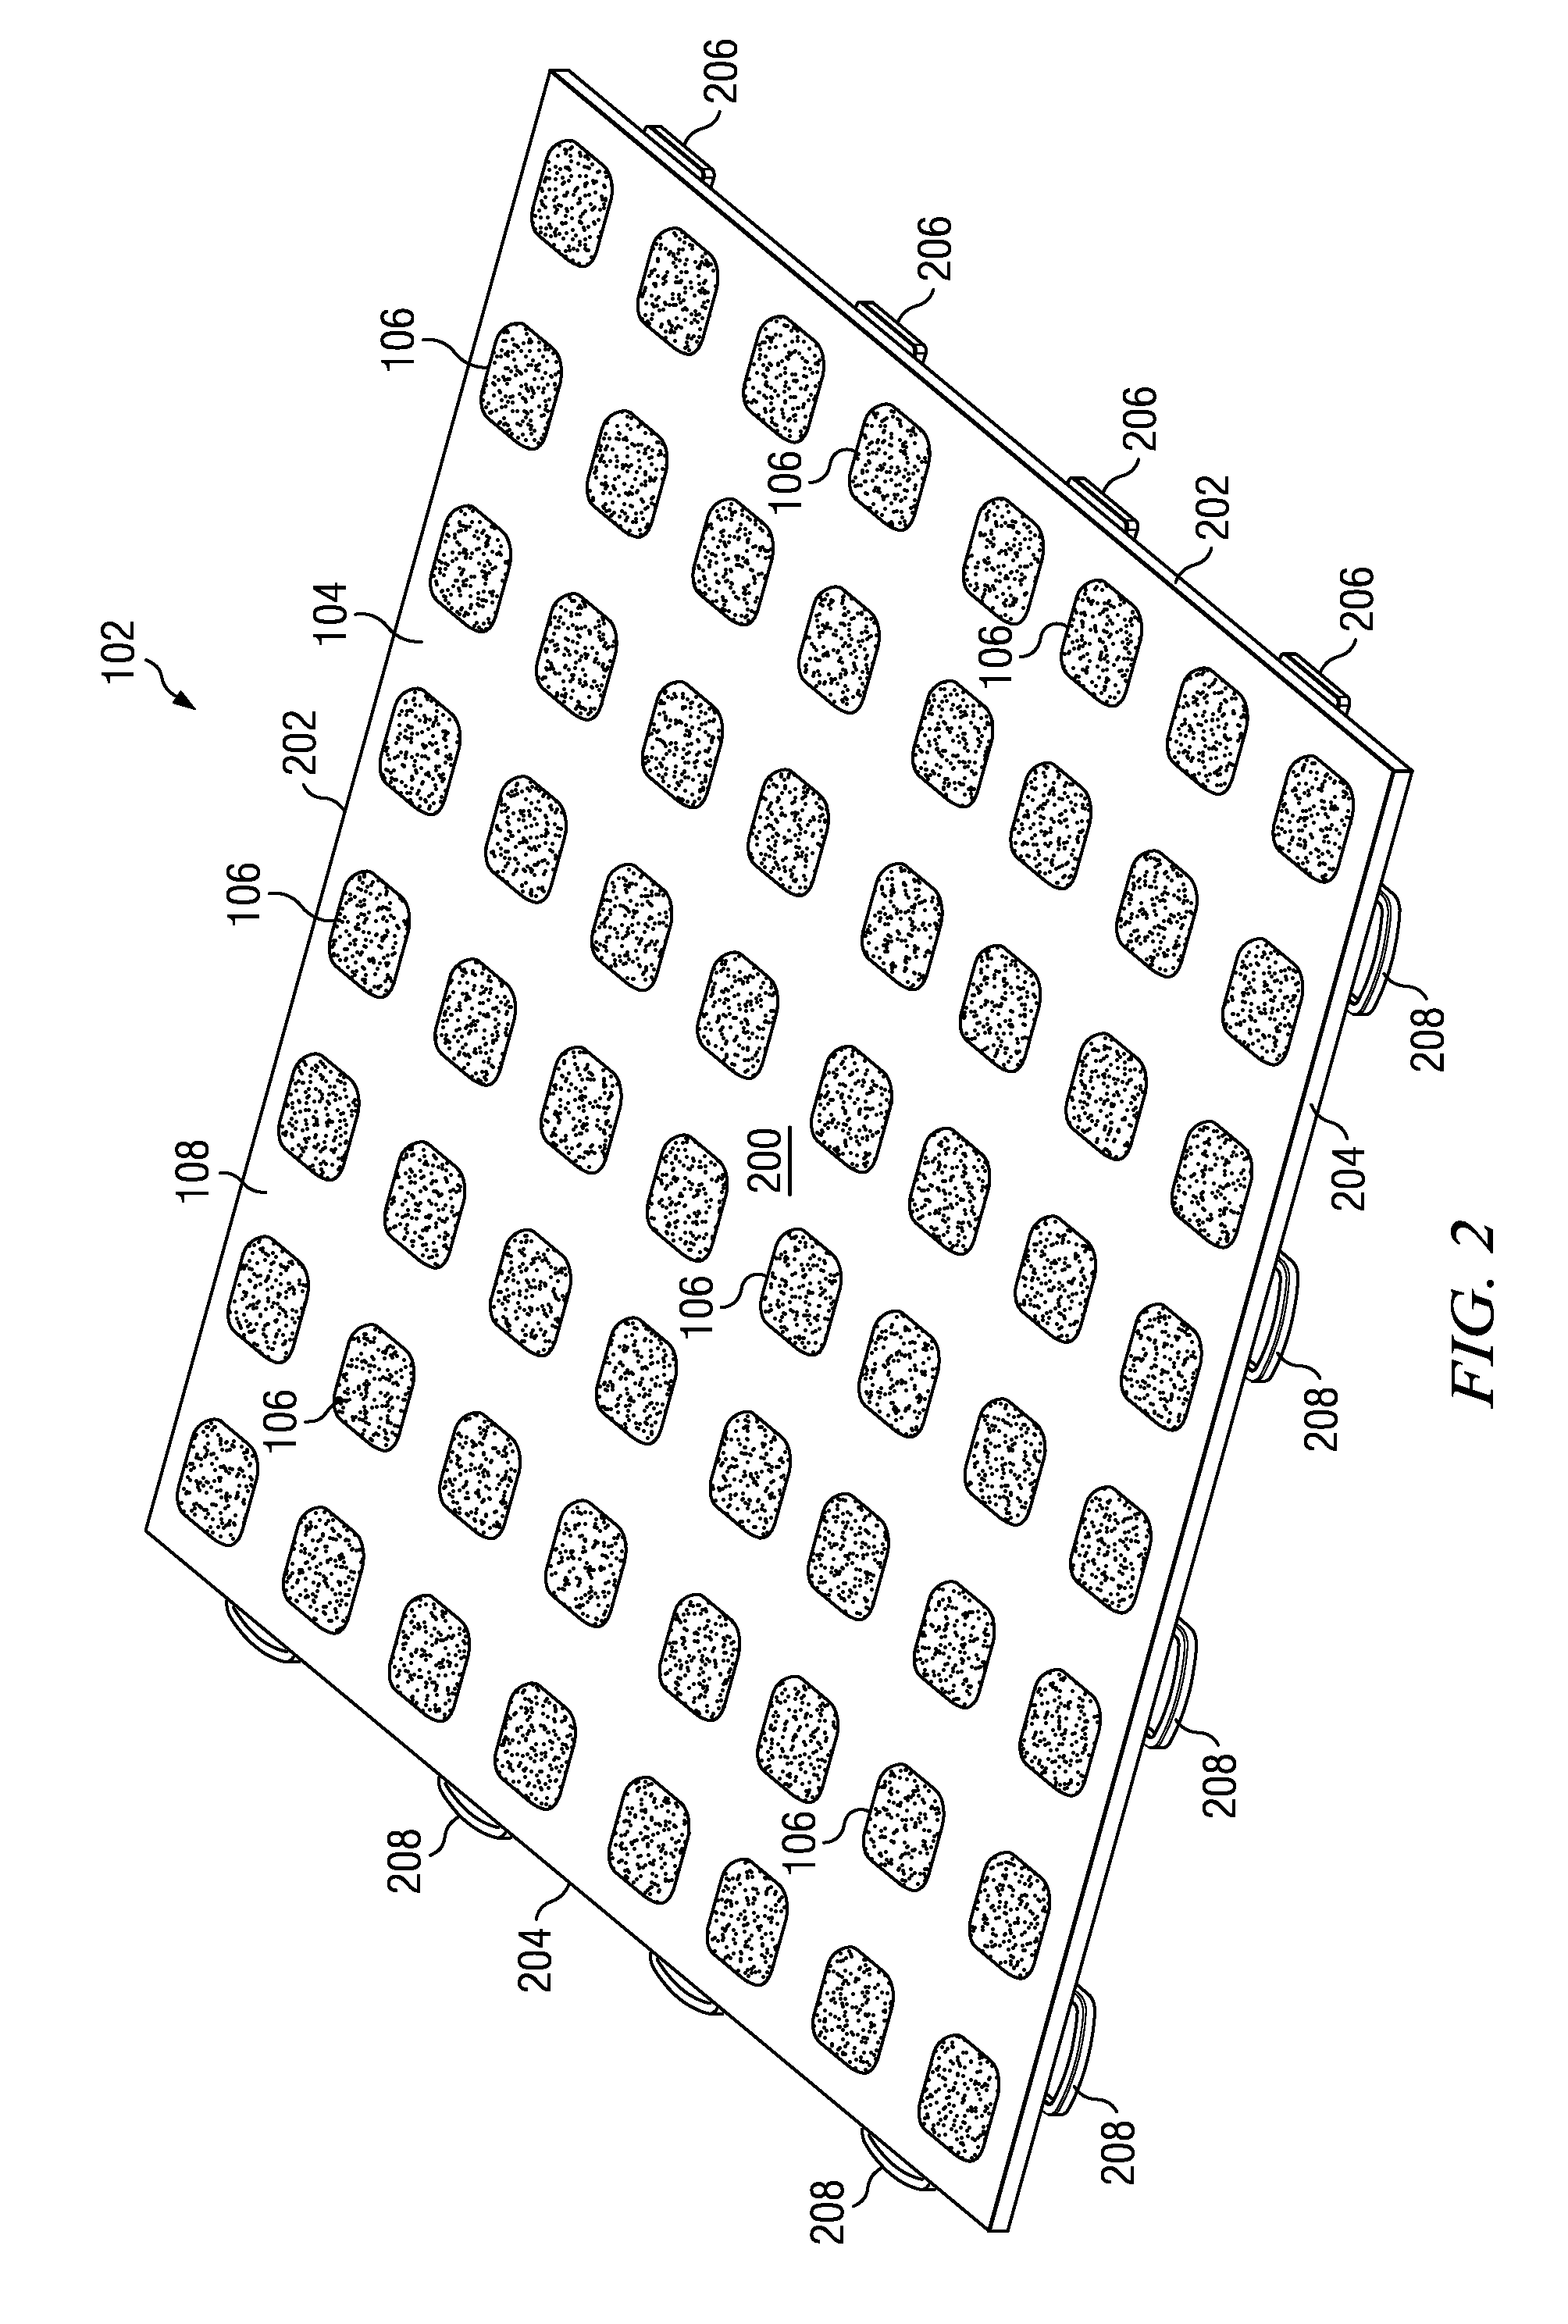 Two-shot injection molded floor tile with vent hole